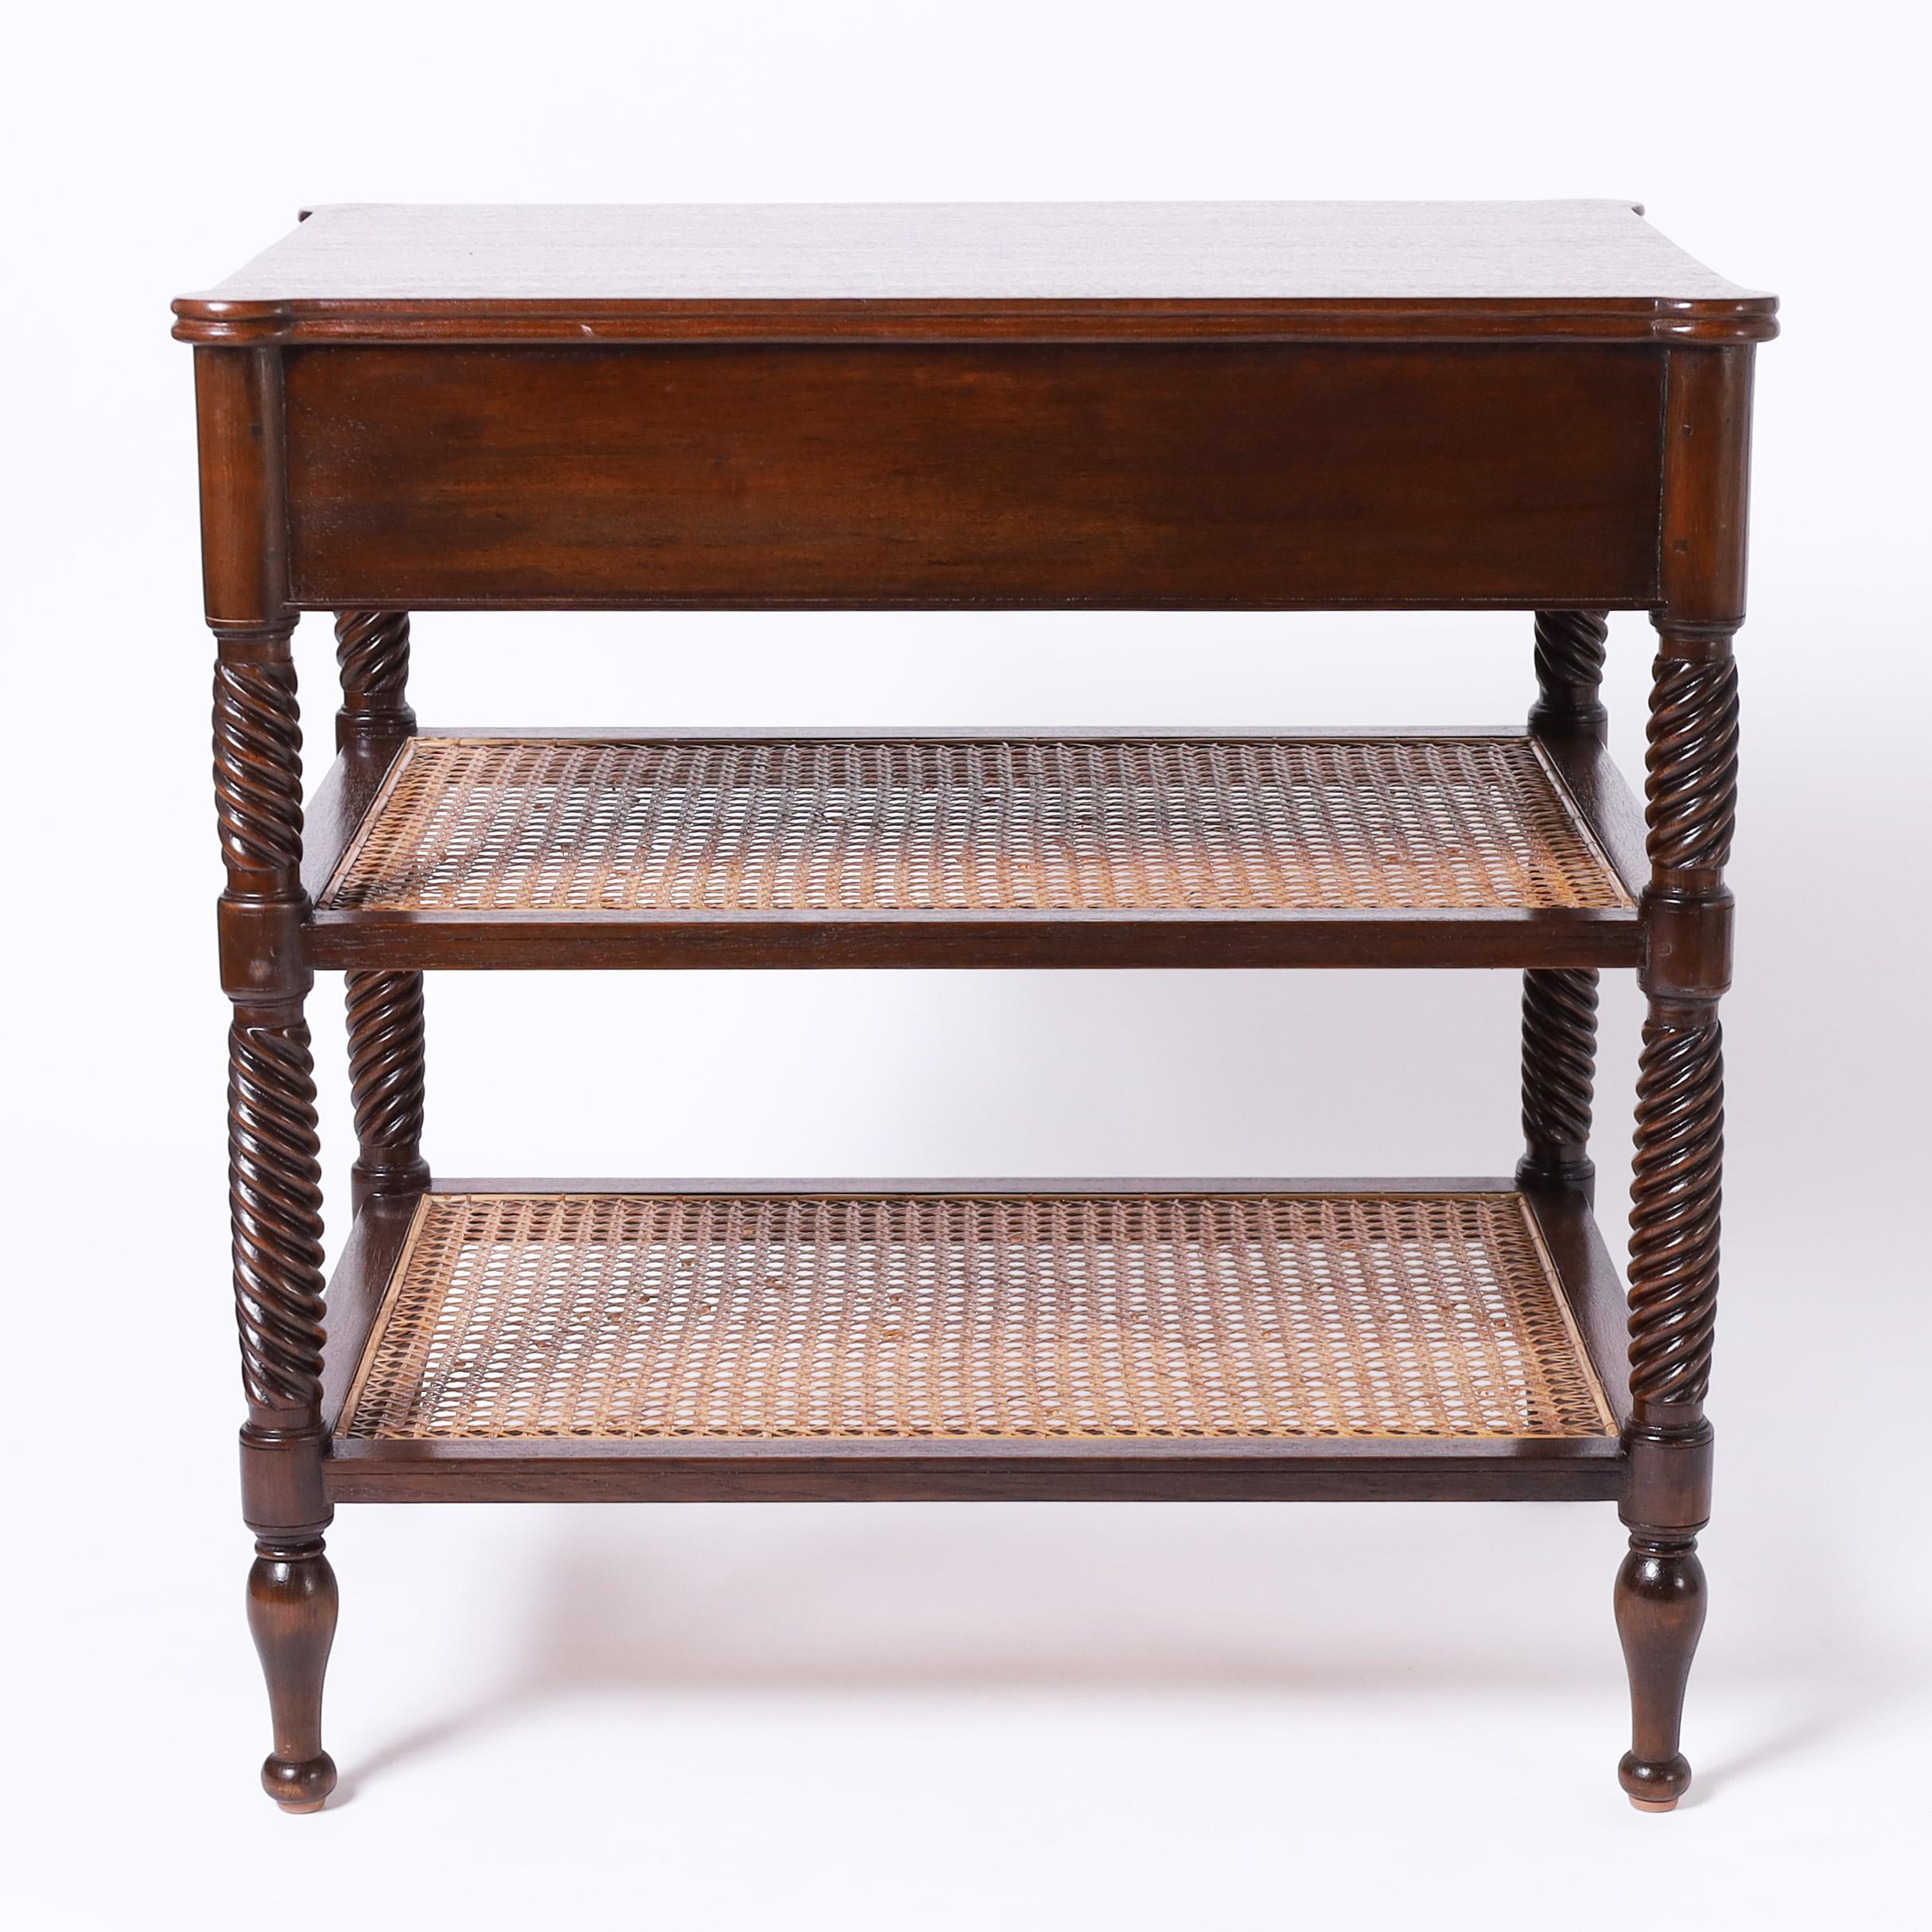 British Colonial Style Three Tiered Caned Stand or Table (Handgefertigt) im Angebot